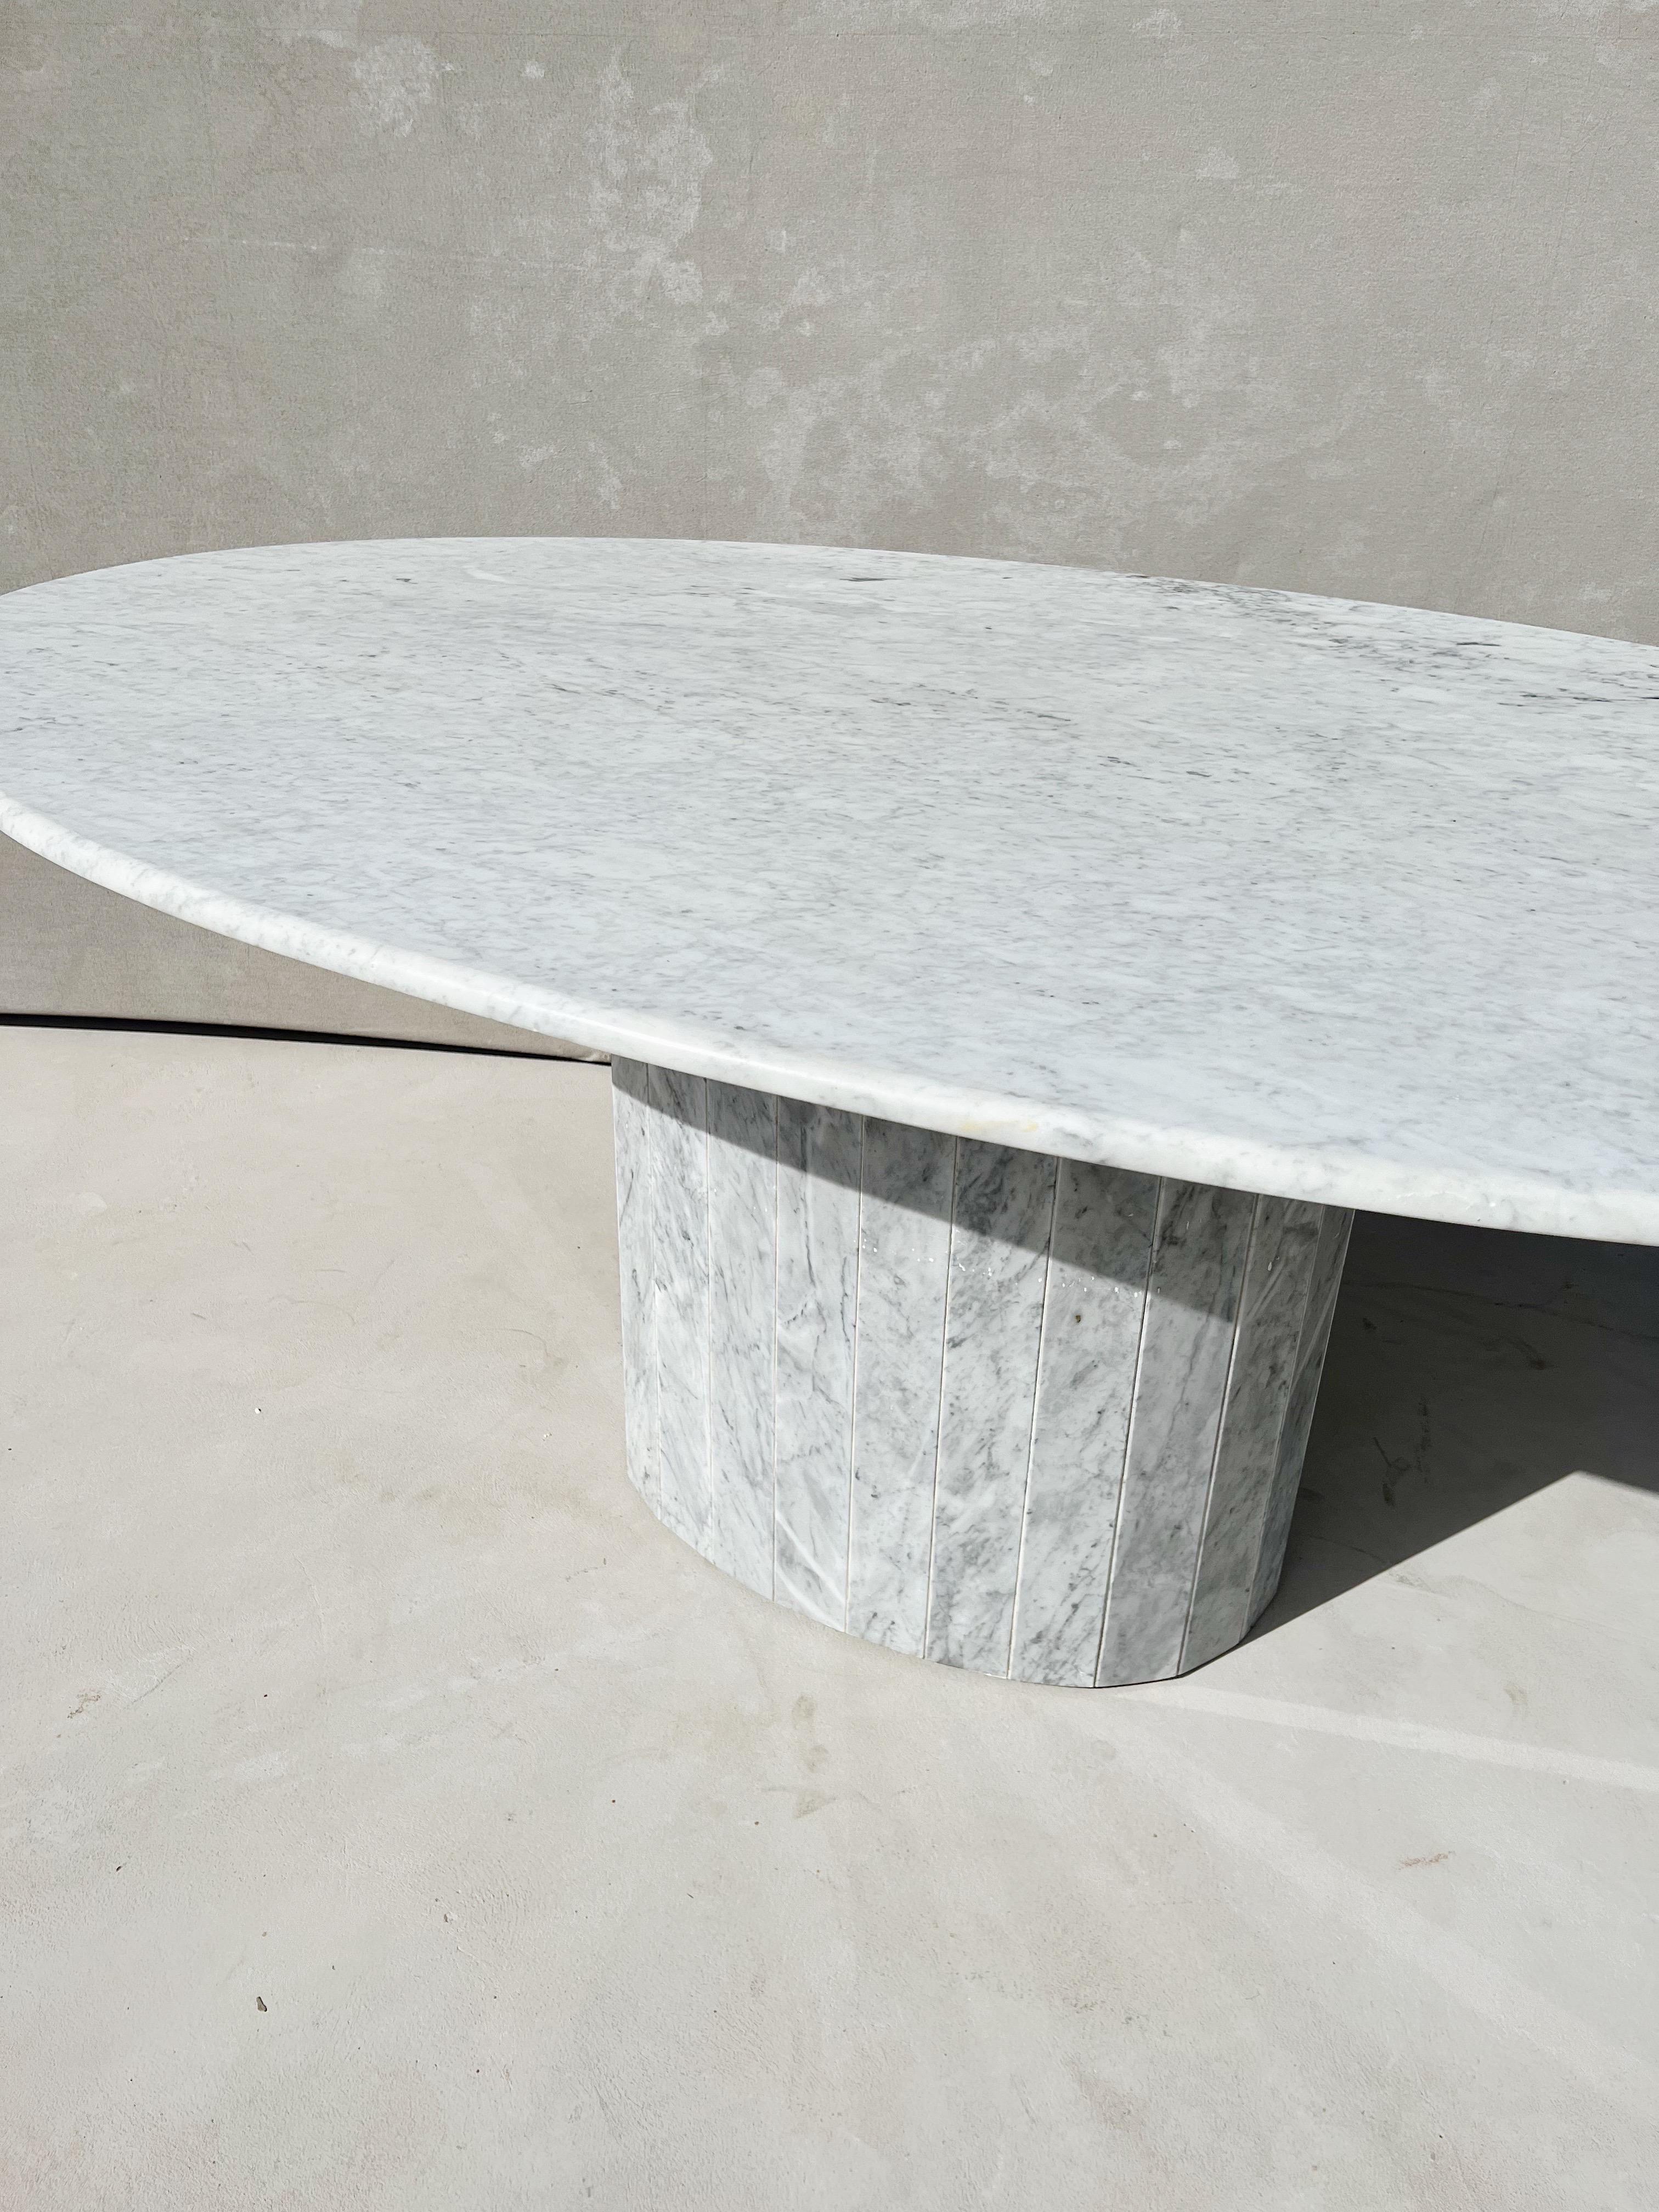 1970s Italian Carrara Marble Oval Dining Table with Fluted Base 2